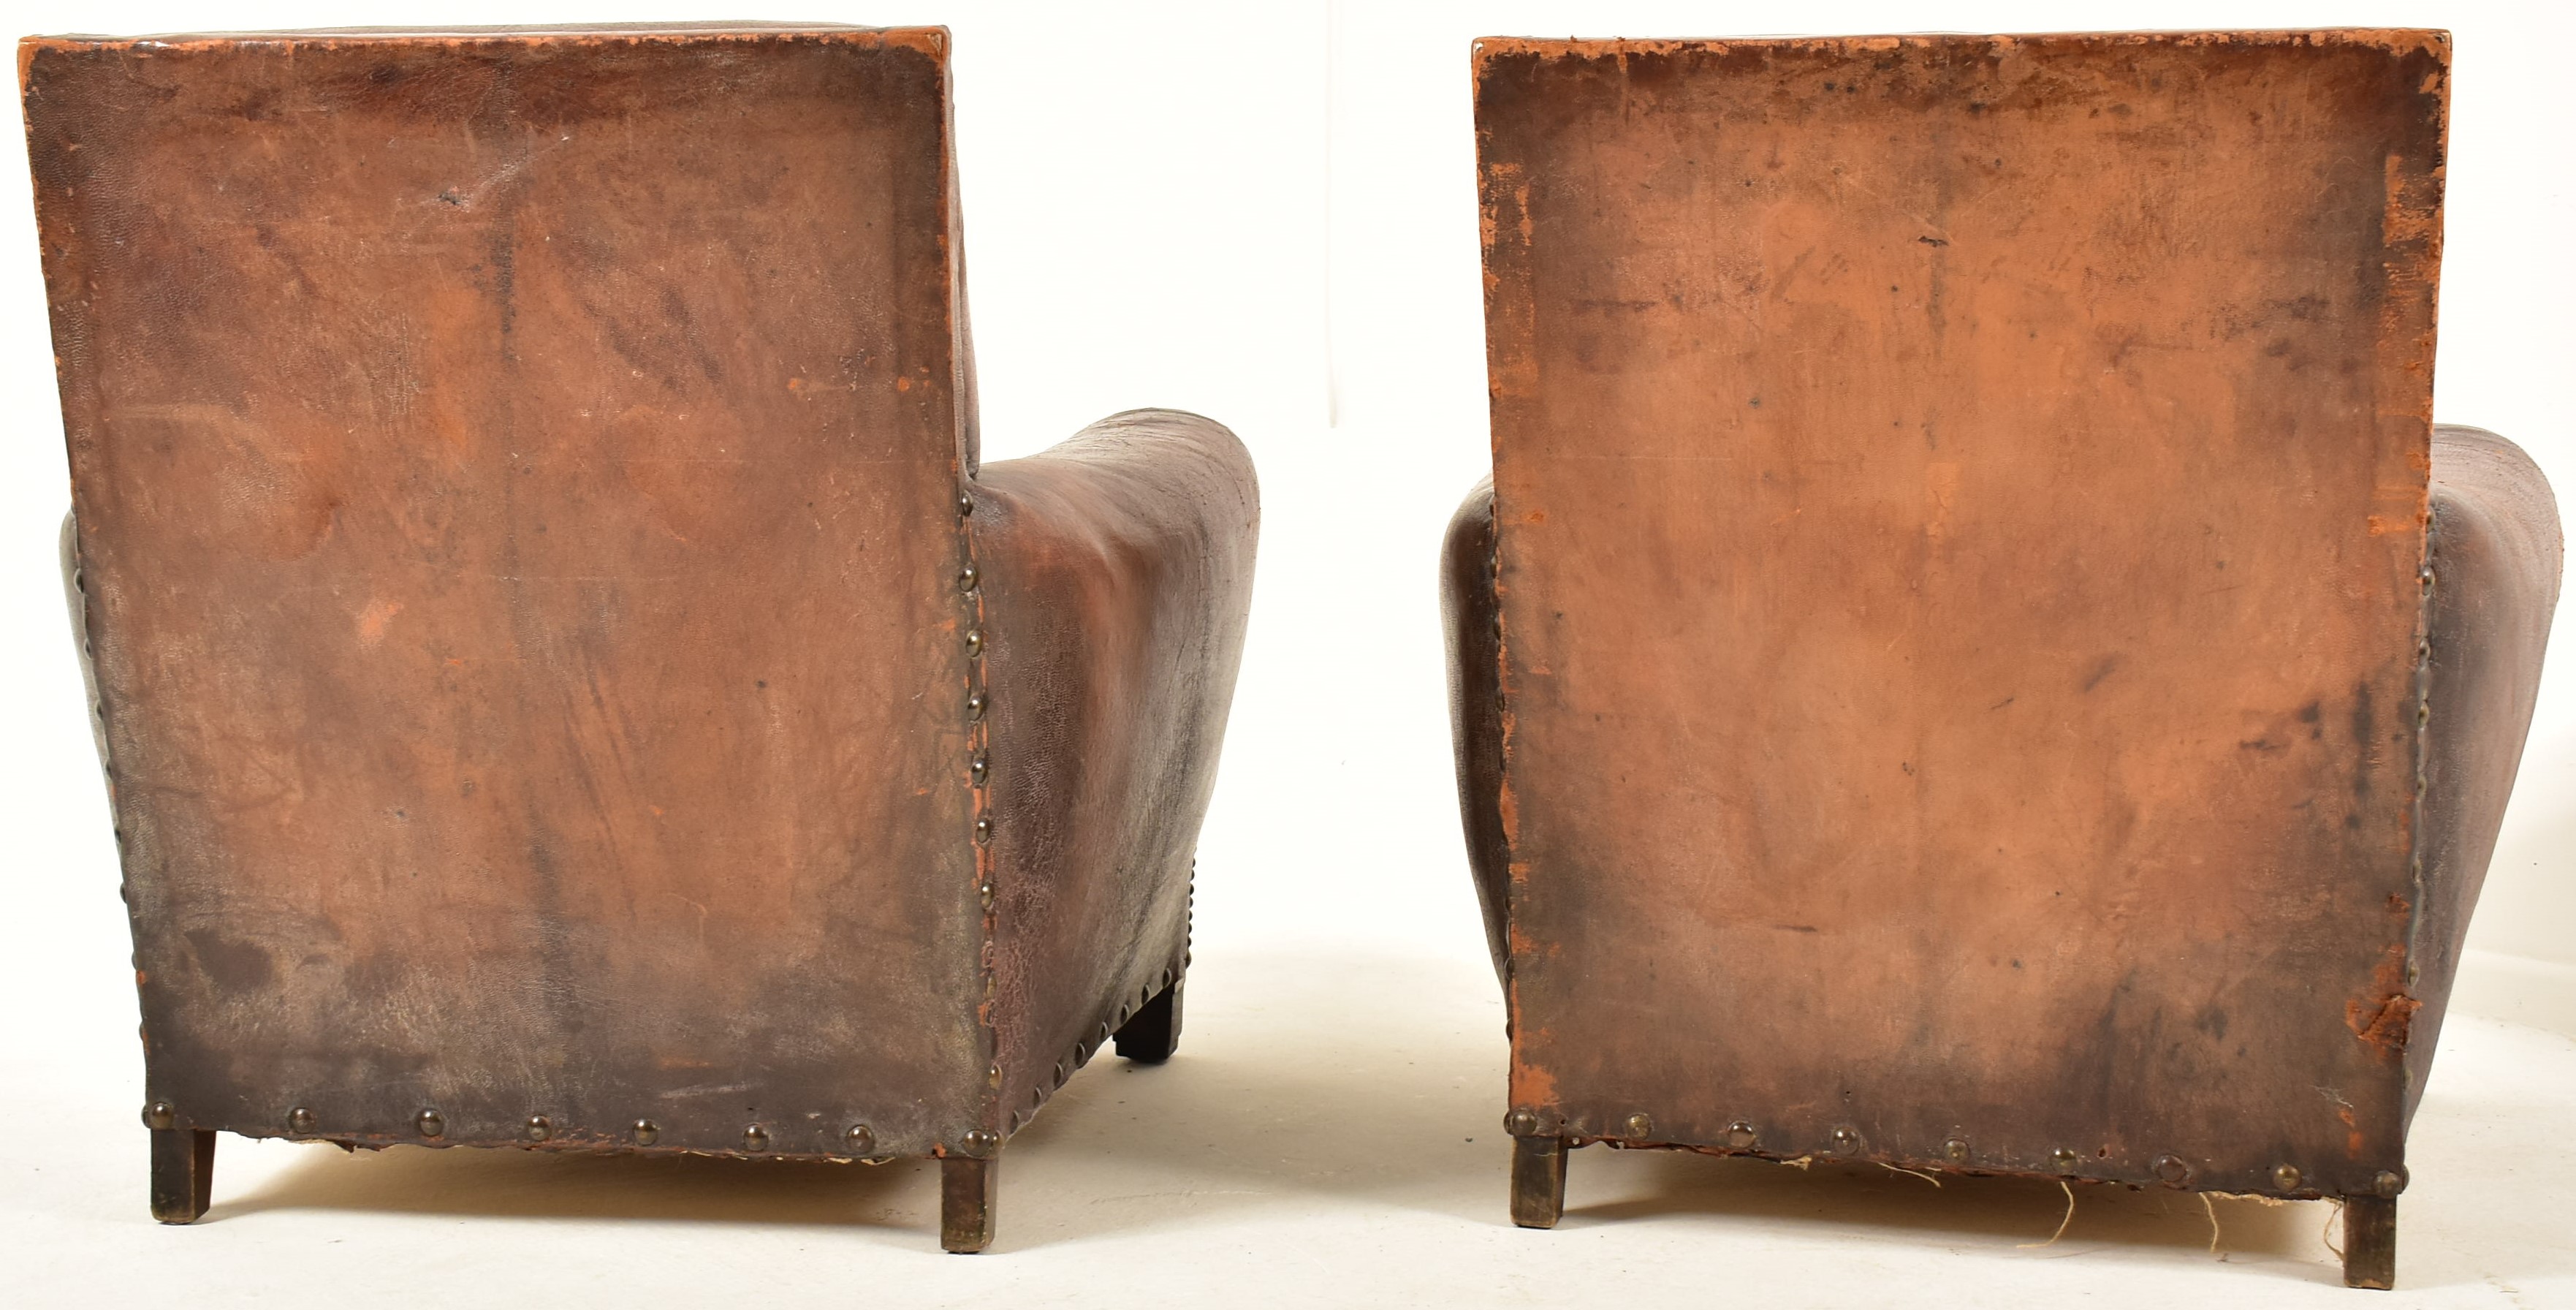 PAIR OF ART DECO LEATHER AND BRASS STUDDED CLUB ARMCHAIRS - Image 7 of 7